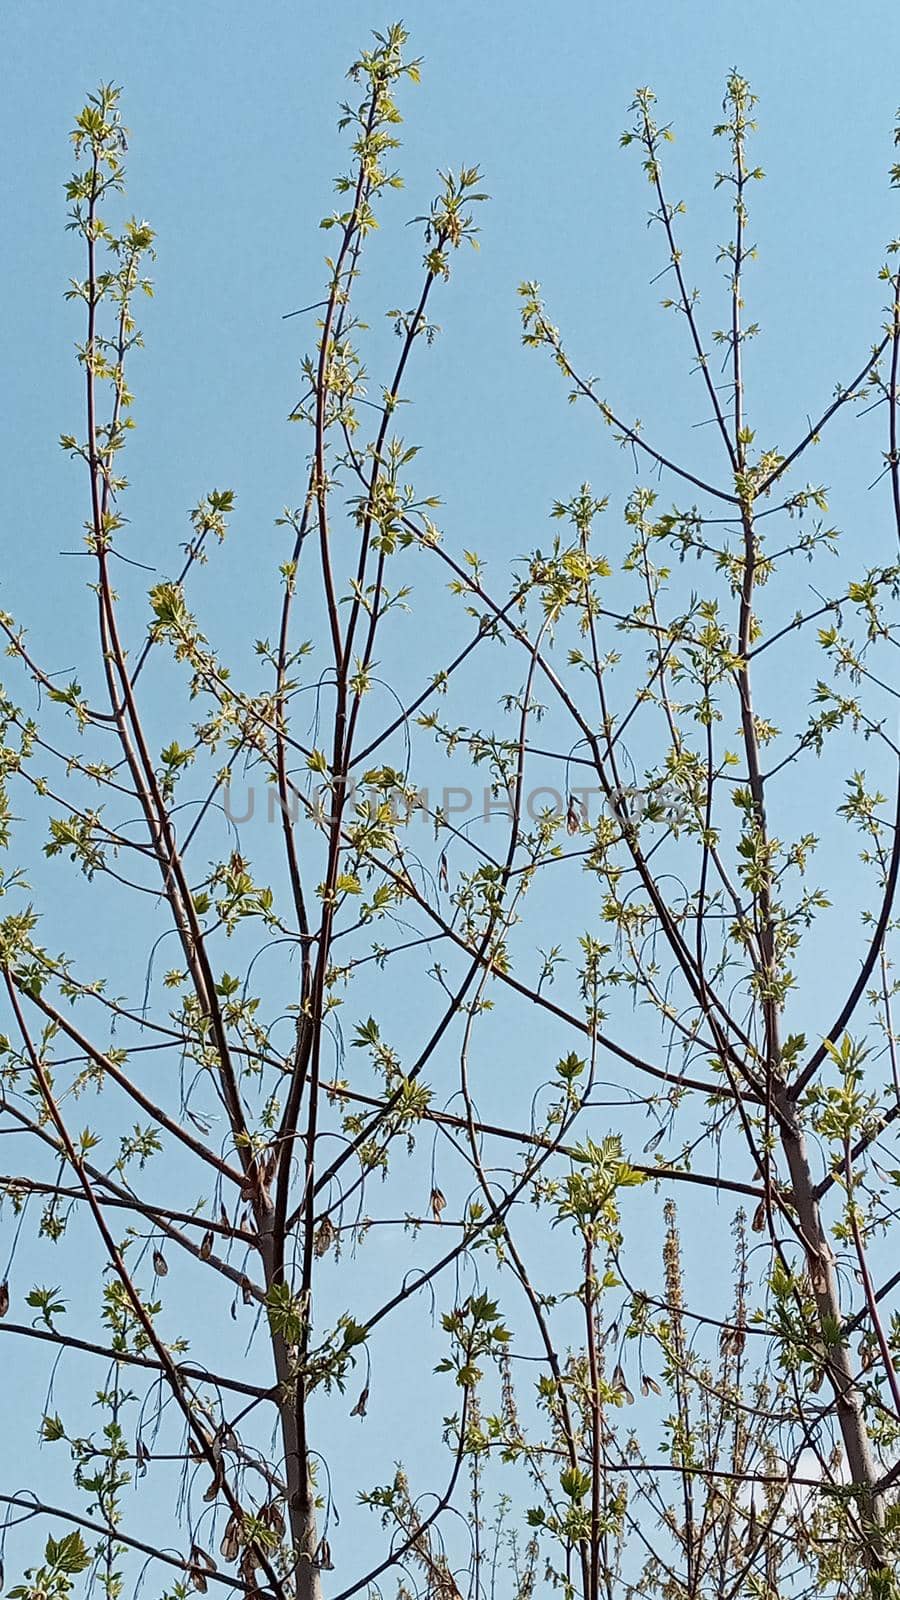 A willow leaf is blooming. There are young green leaves on a thin branch. Nature comes to life in spring. Willow tree.